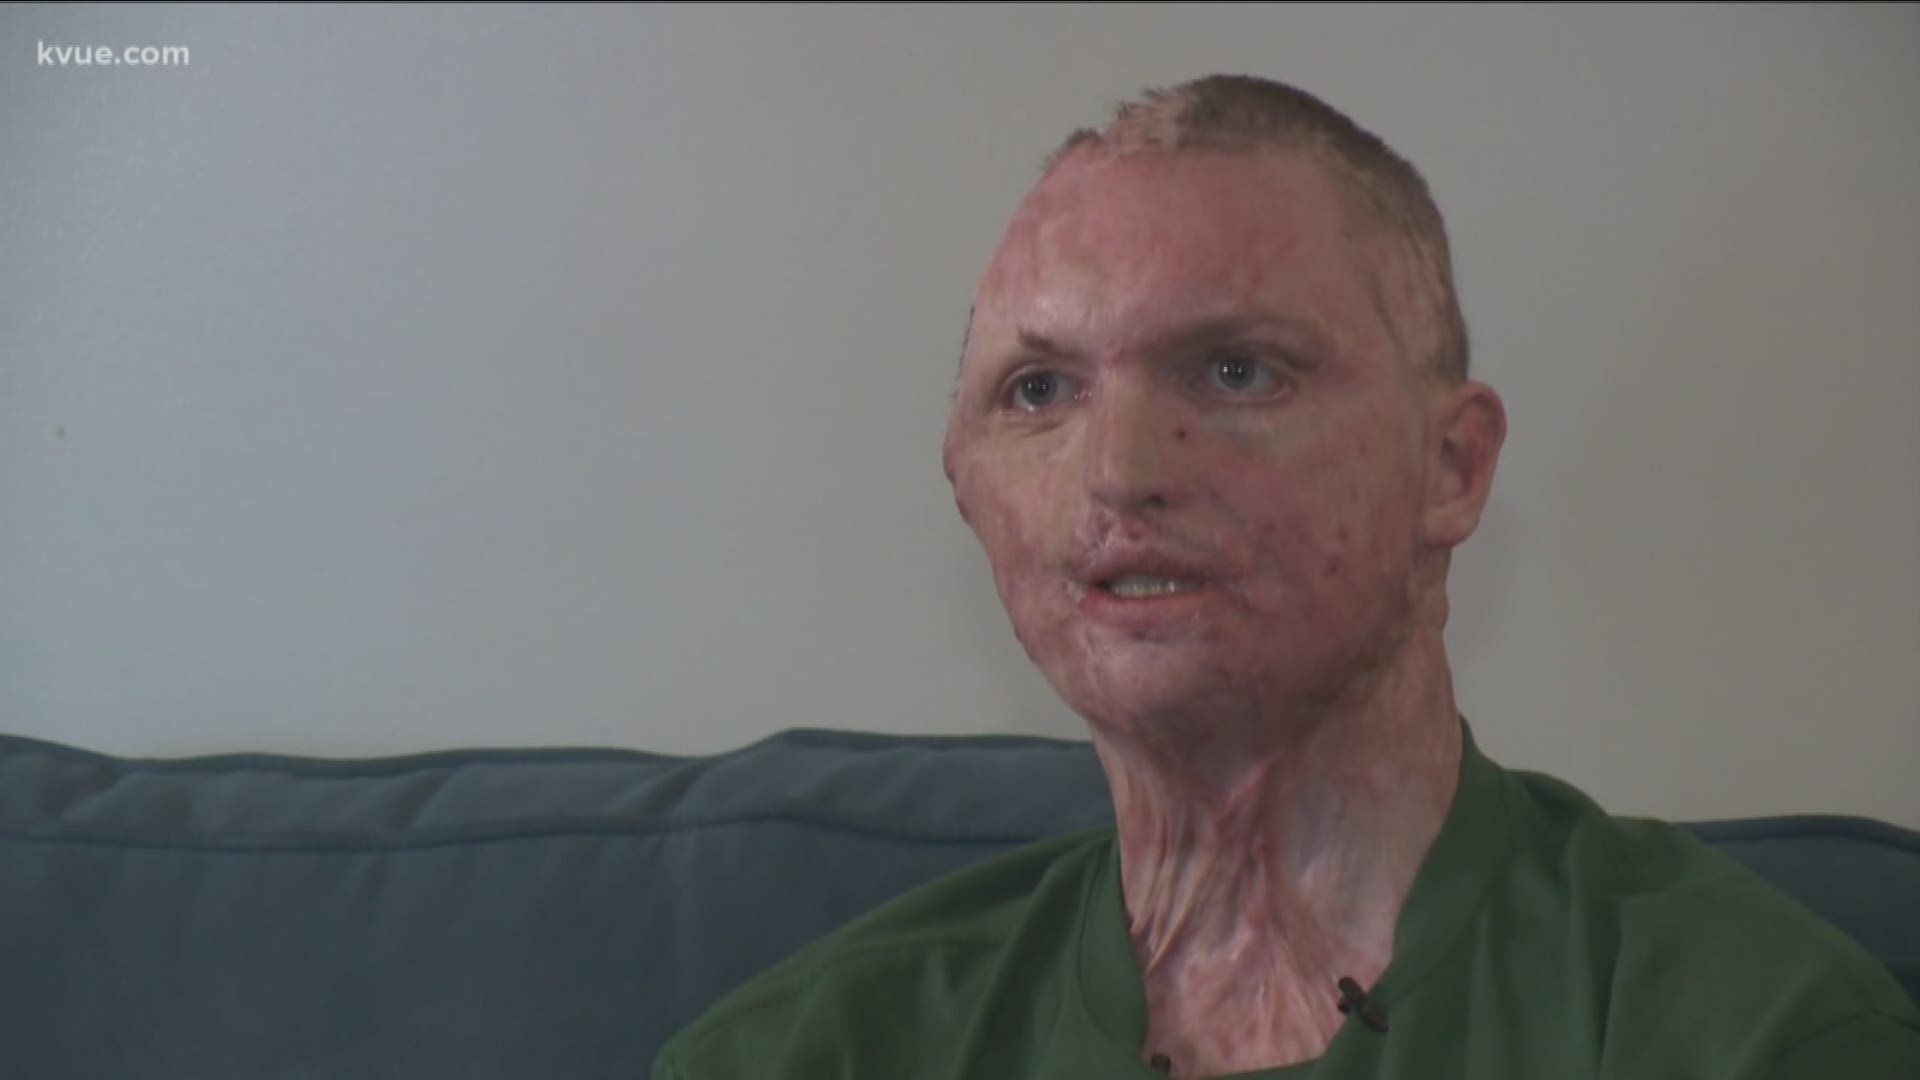 Zachary Sutterfield, who survived the fire at the Iconic Village Apartment in San Marcos with burns on nearly 70% of his body, walks us through the heartbreaking divide between his life before and after.